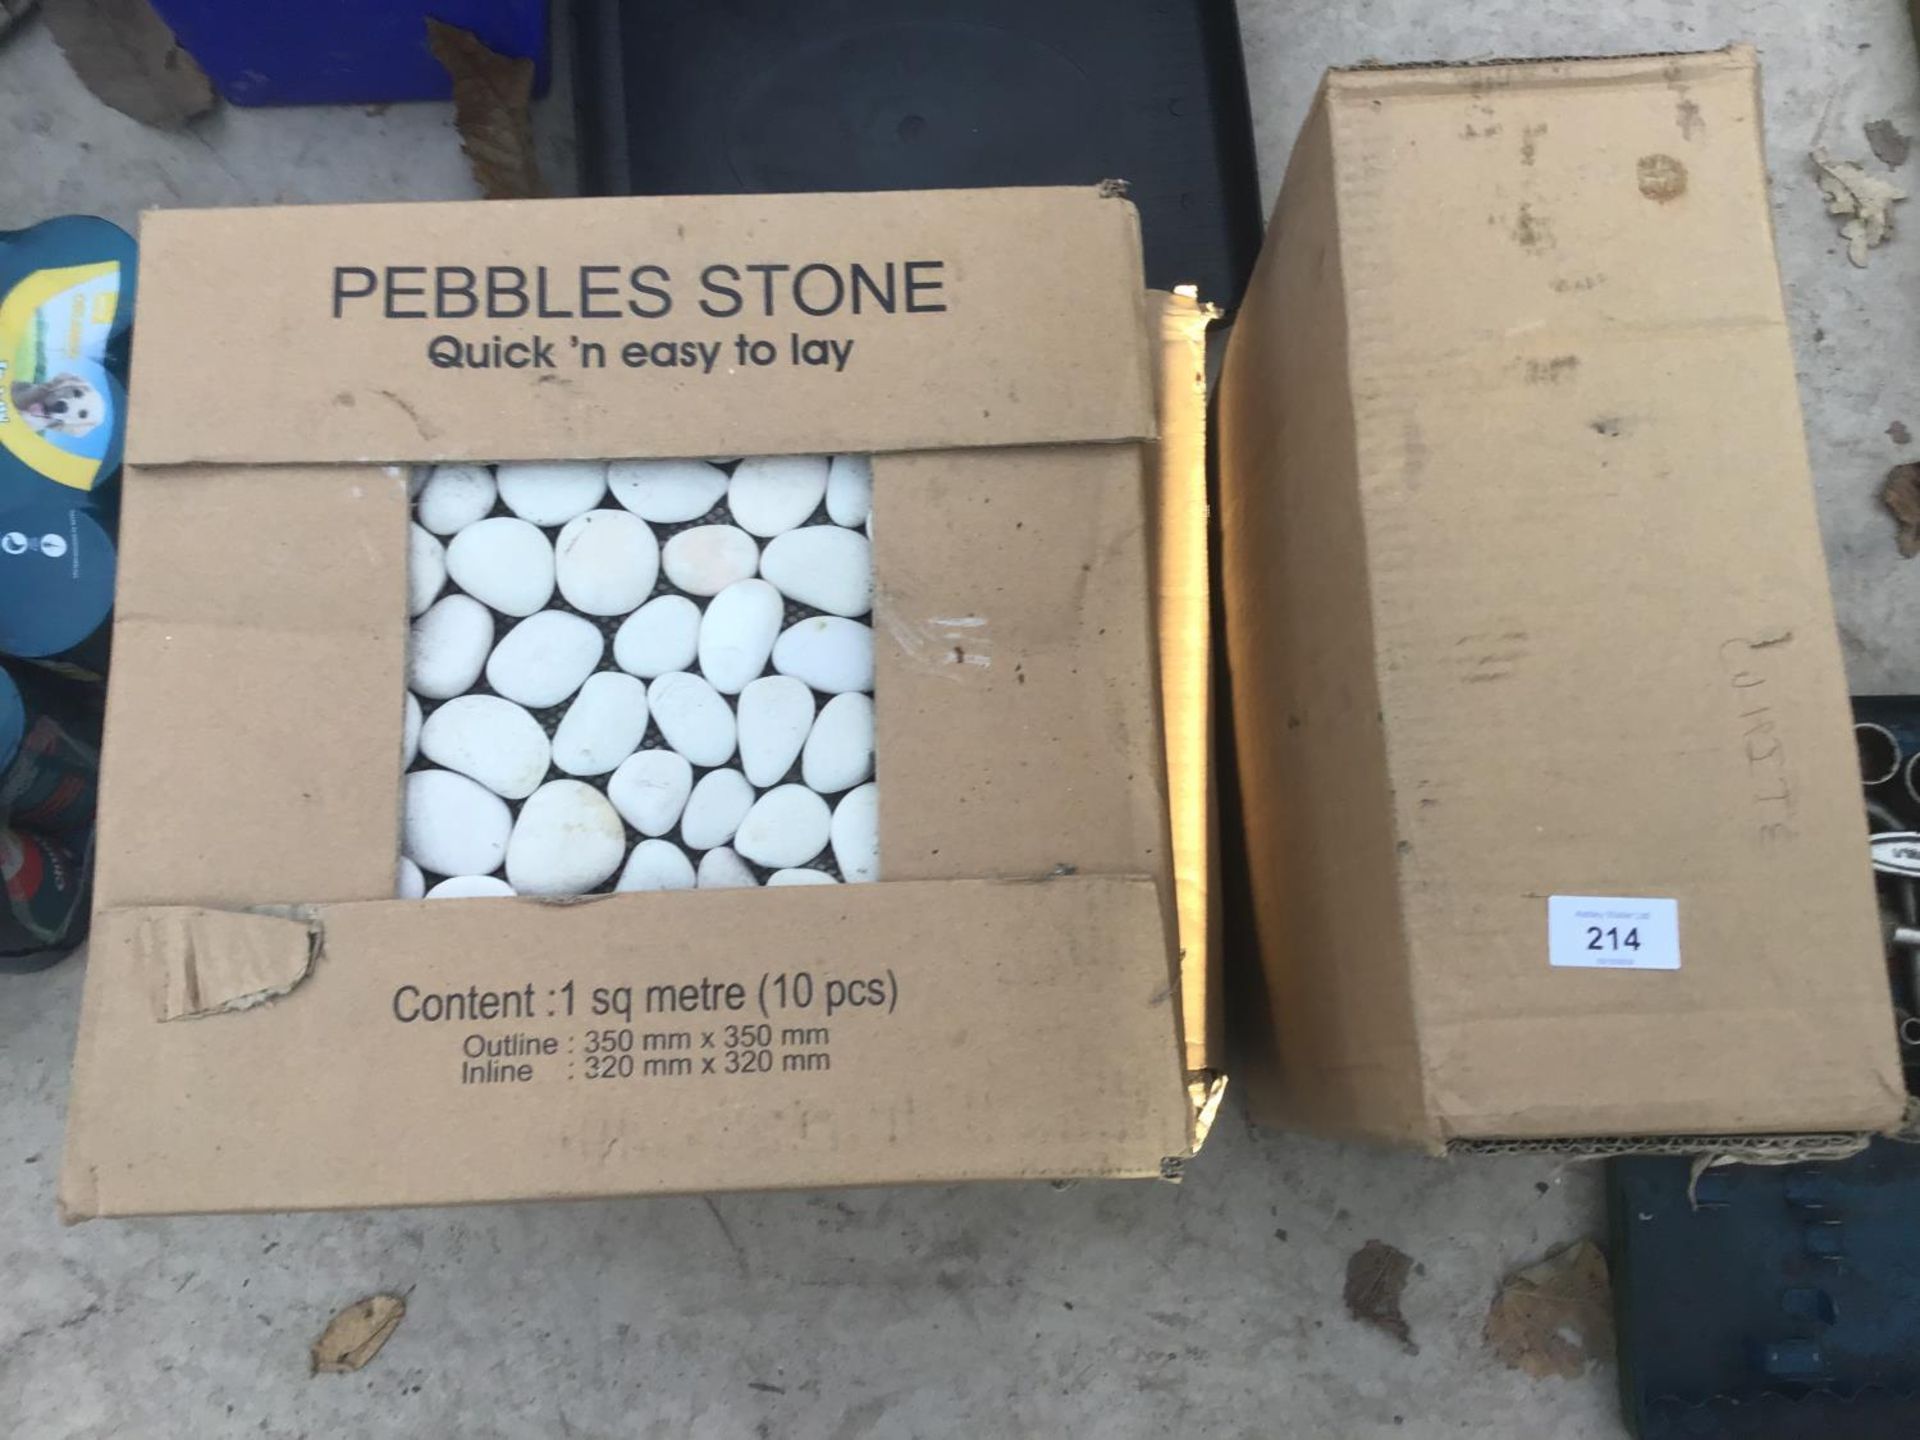 THREE BOXES CONTAINING ONE SQUARE METRE EACH OF PEBBLES STONE TILES